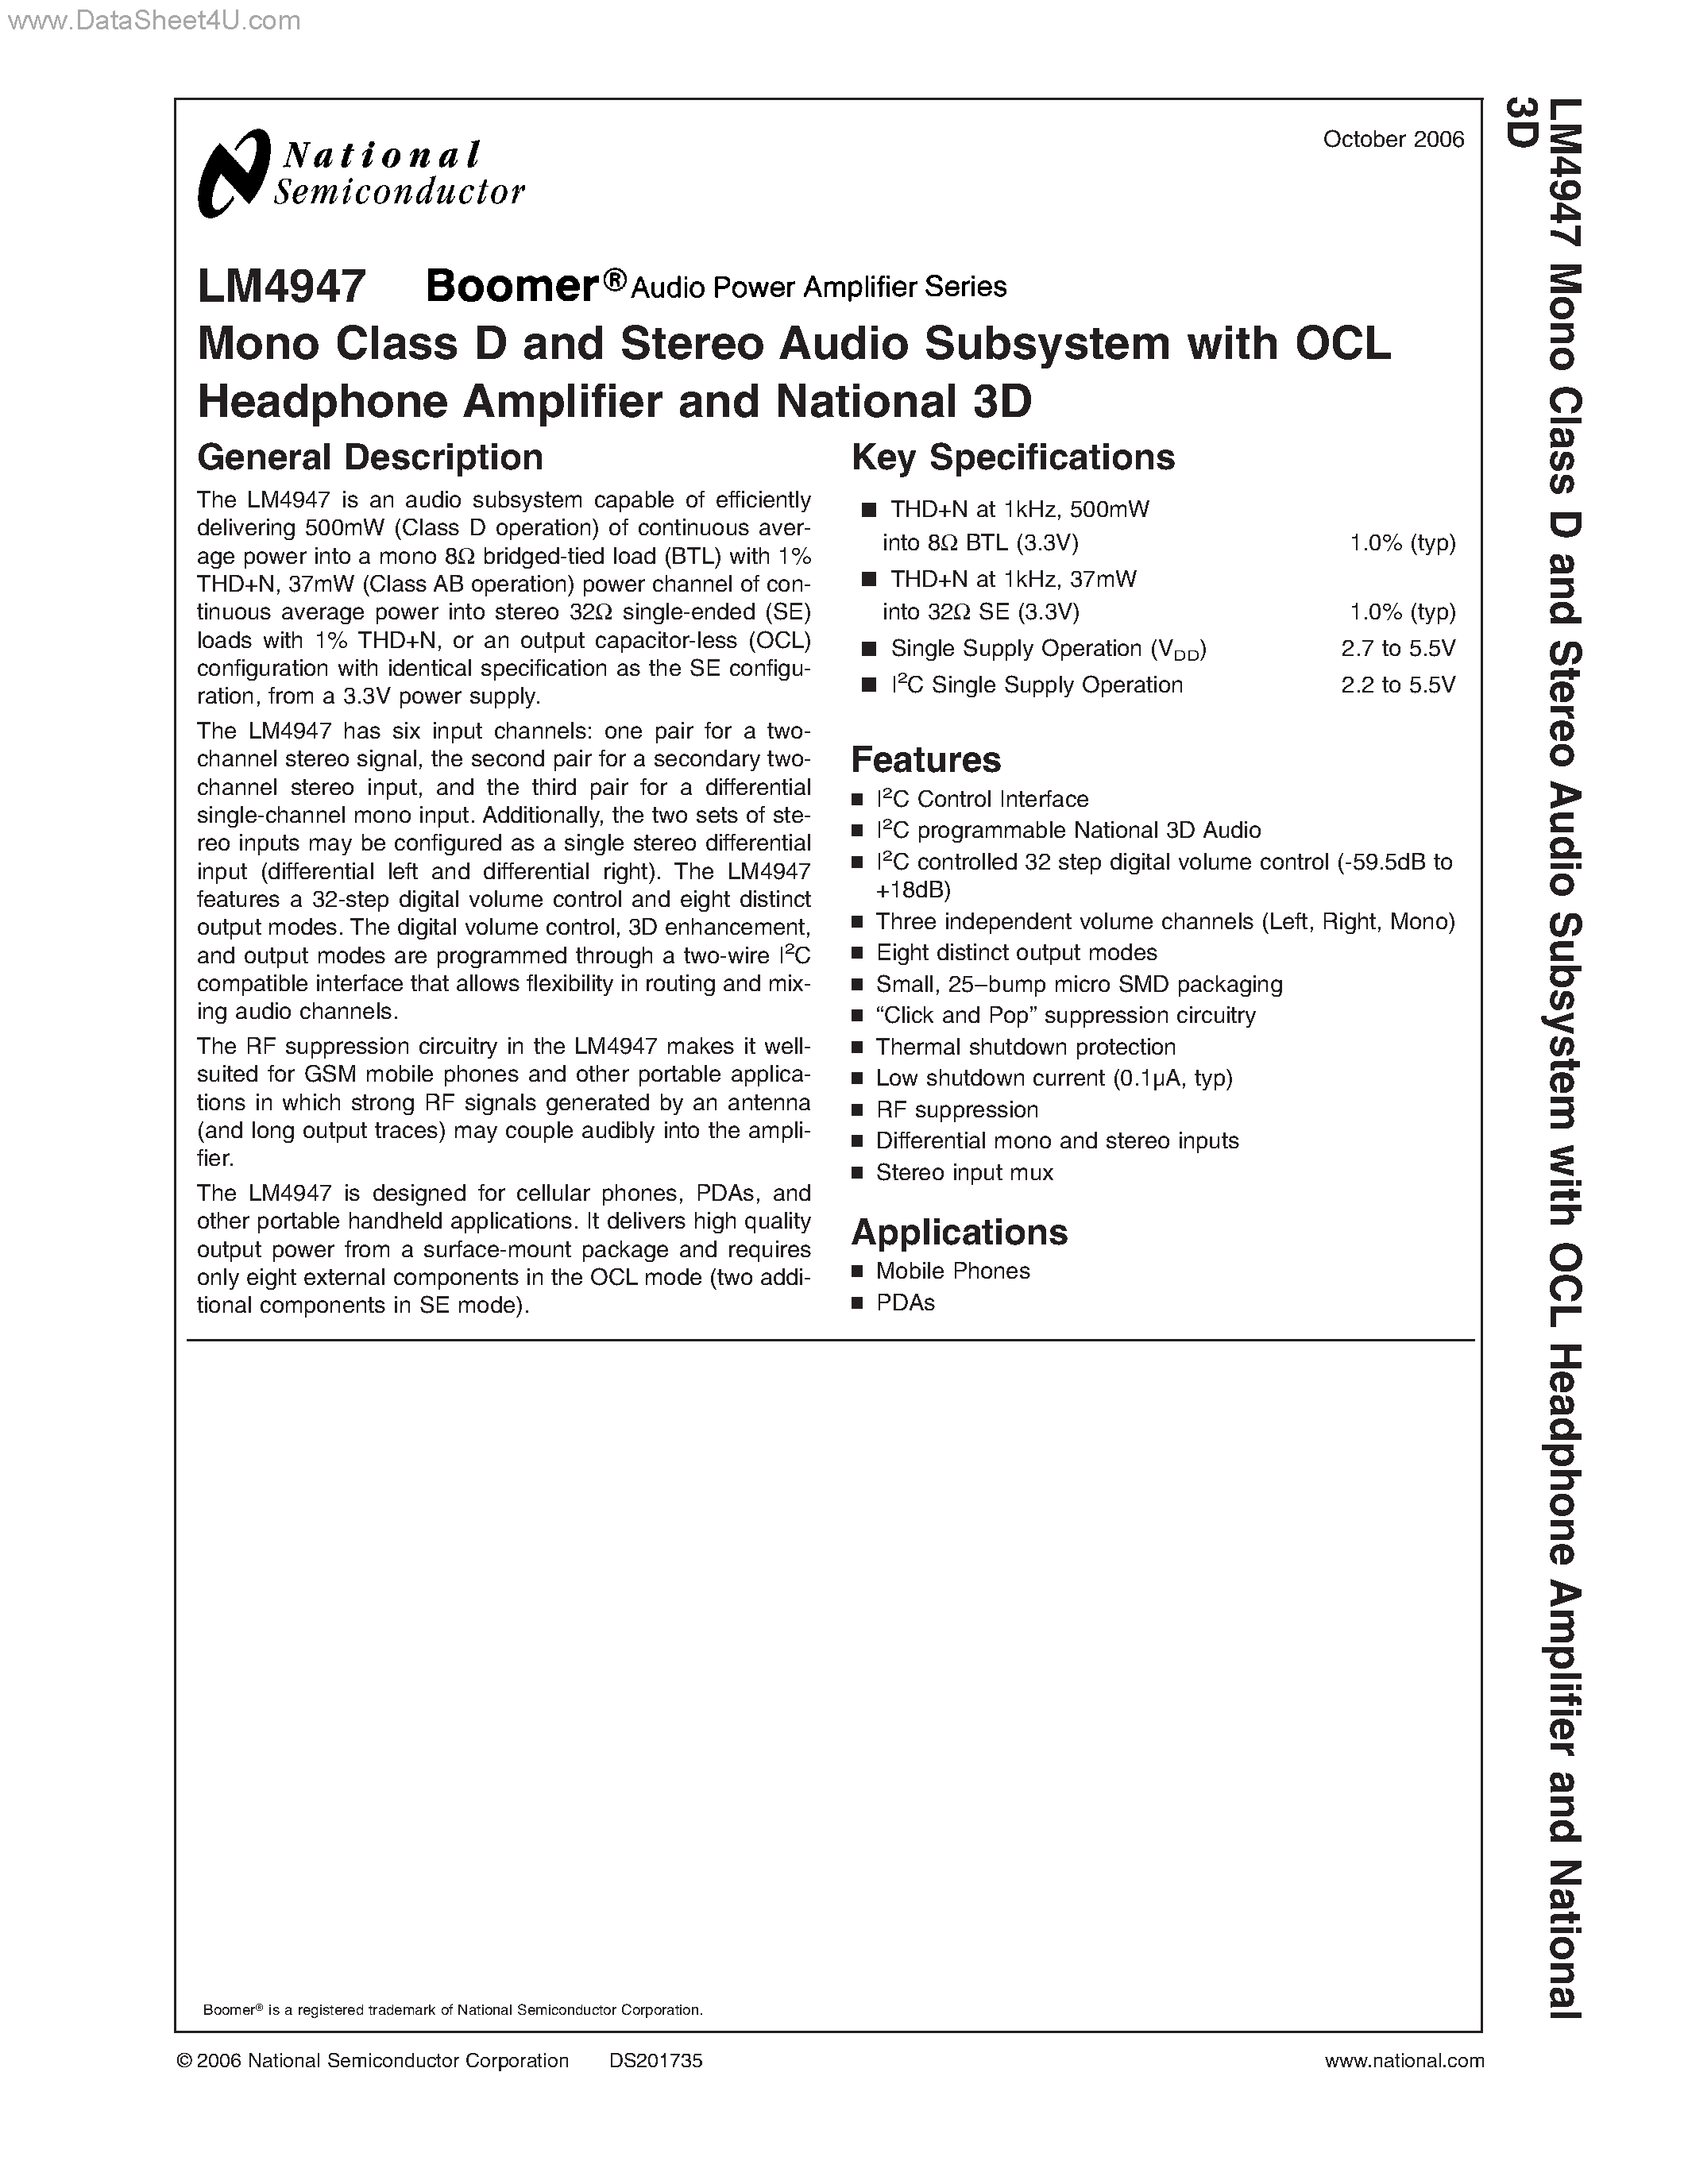 Datasheet LM4947 - Mono Class D and Stereo Audio Subsystem page 1